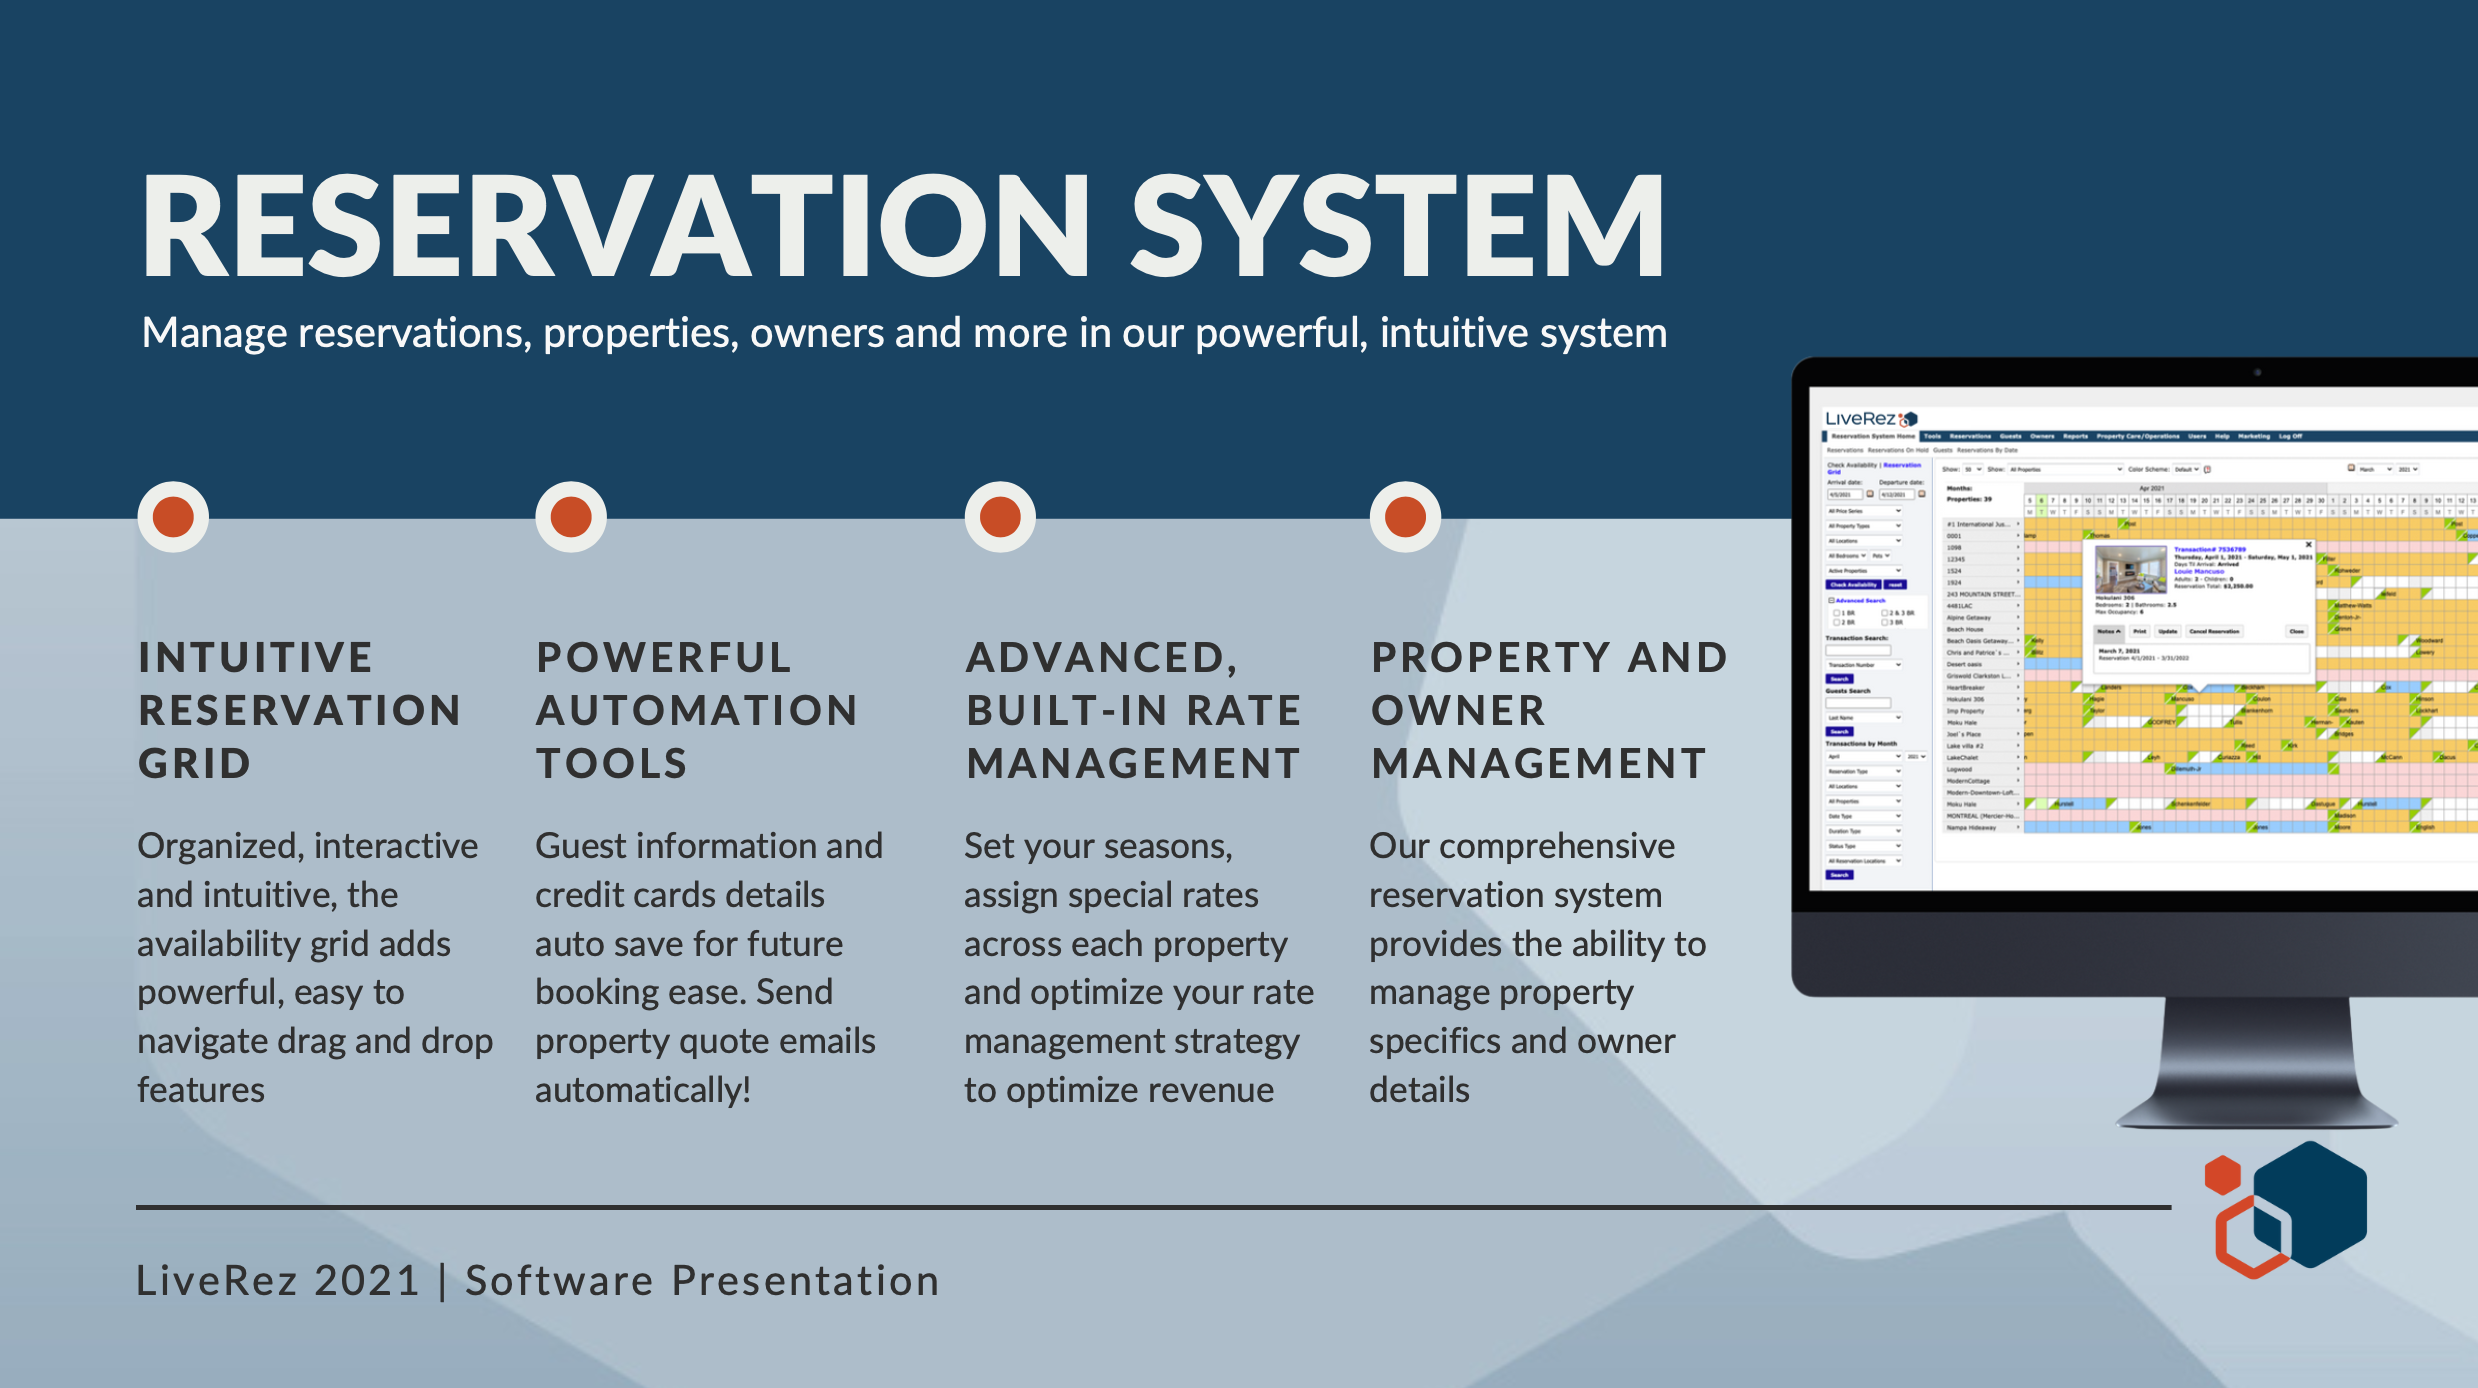 LiveRez Software - The booking platform includes robust reporting, instant quotes, built in CRM for lead tracking and communication and direct connections to OTA's like VRBO, AirBnb and more. Reservation grid, the owner portals and automated owner statements are a highlight